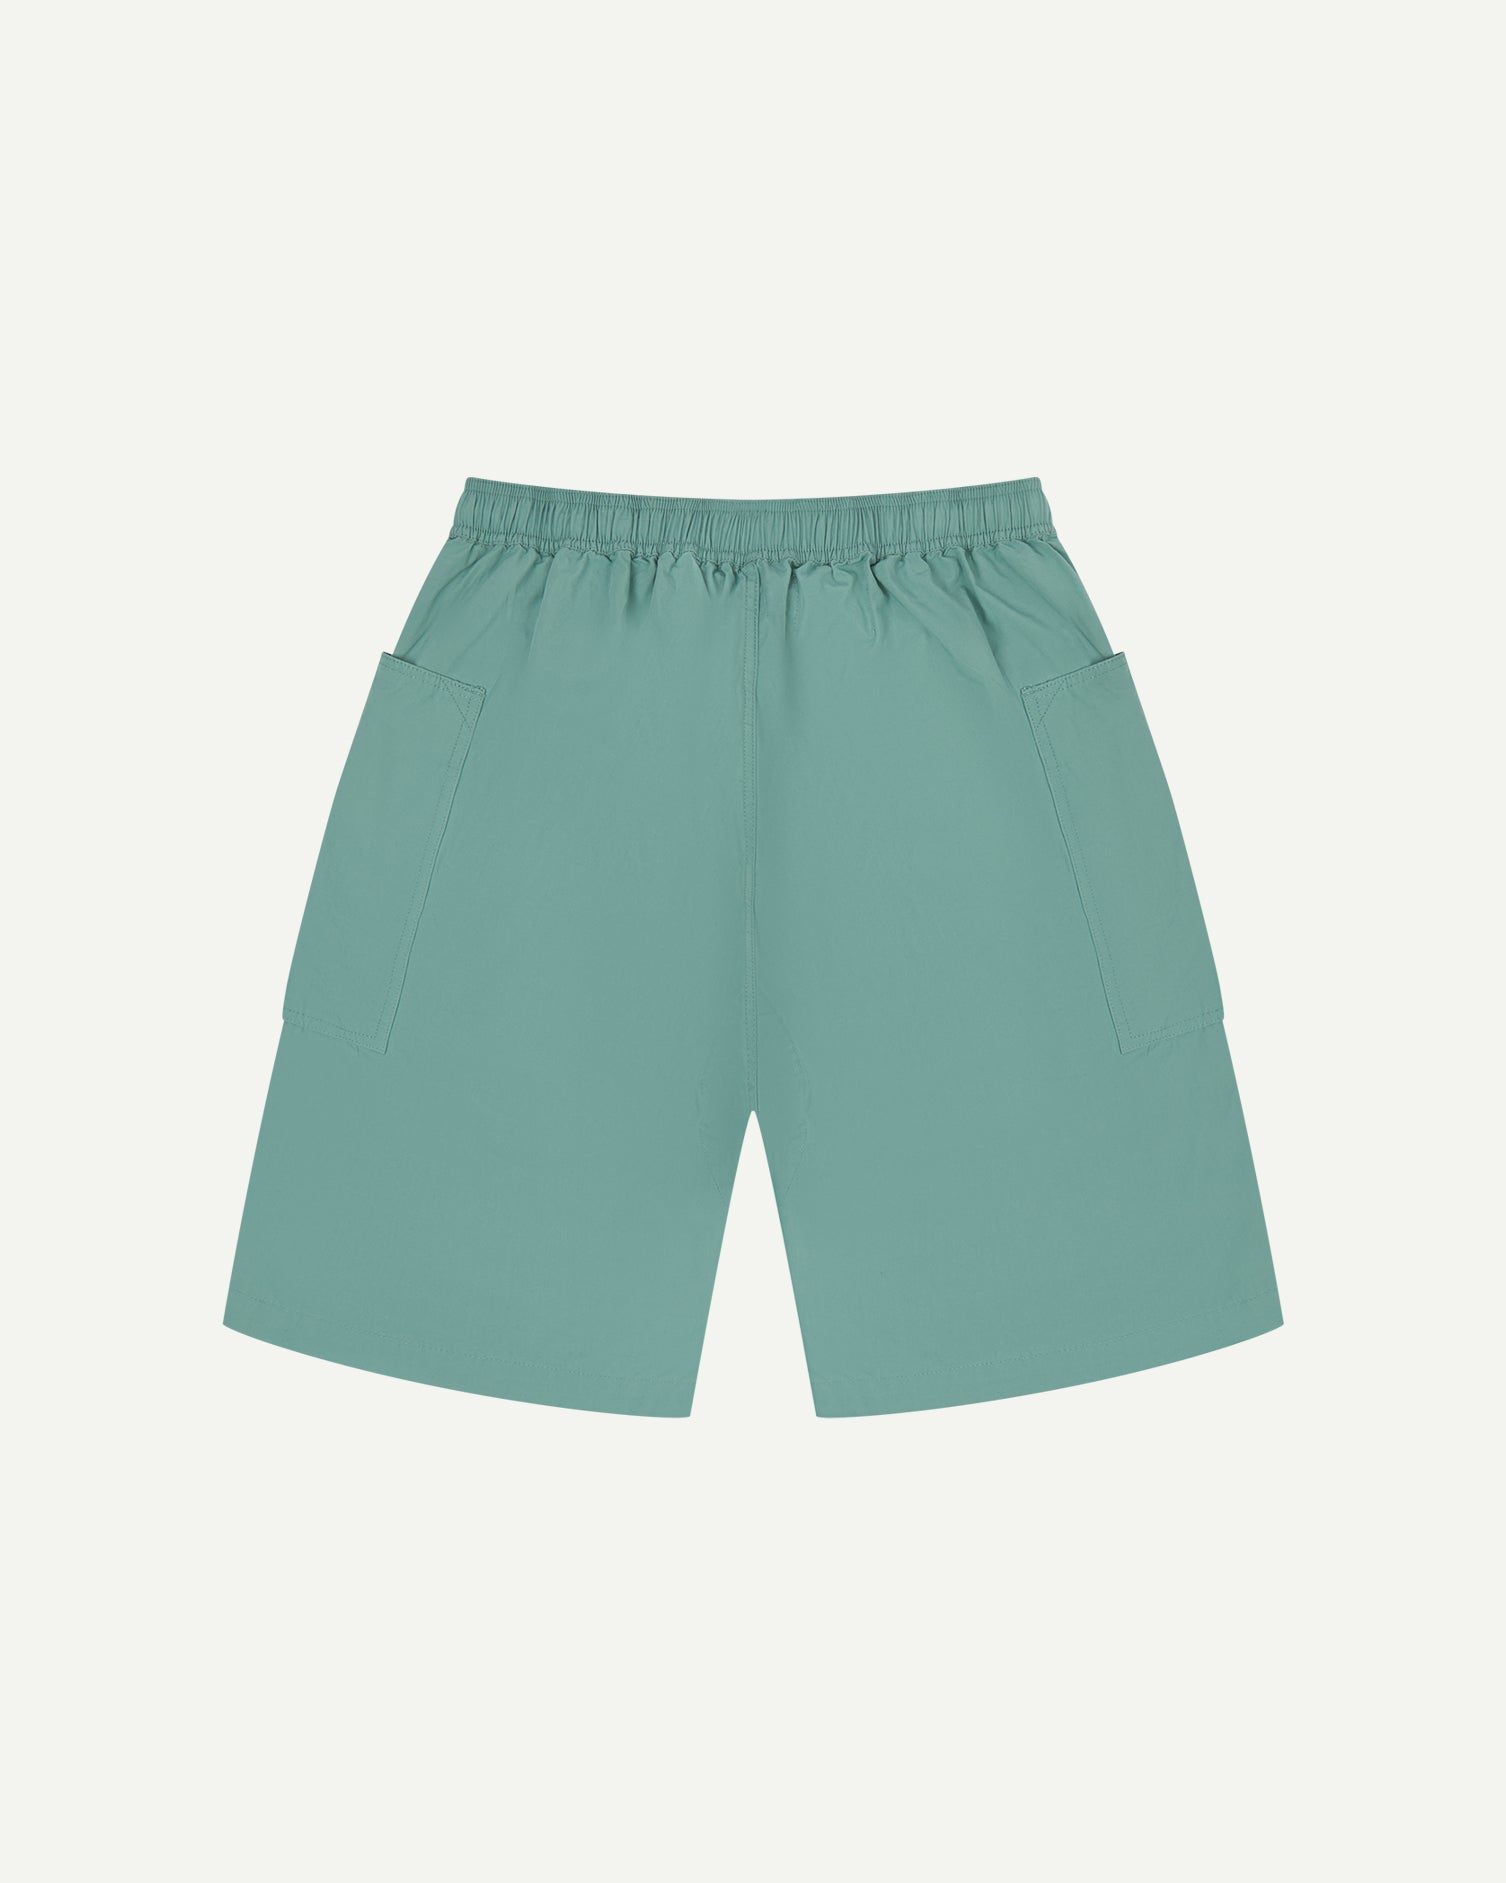 Back view of eucalyptus green organic cotton #5015 lightweight cotton shorts by Uskees. Clear view of elasticated waist .